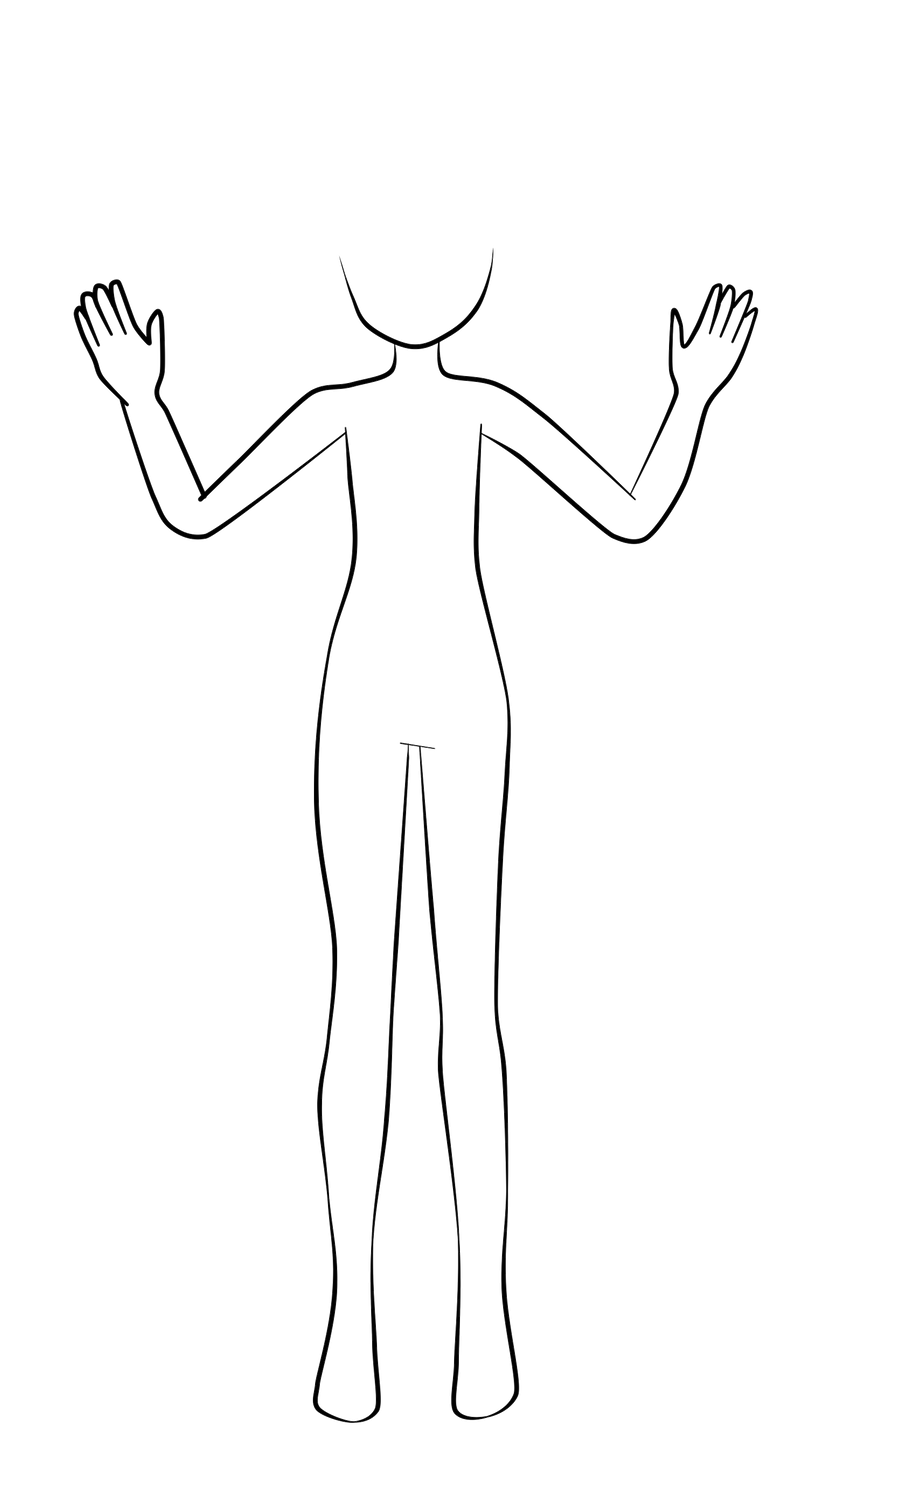 Anime Body Outline Drawing bmpclown